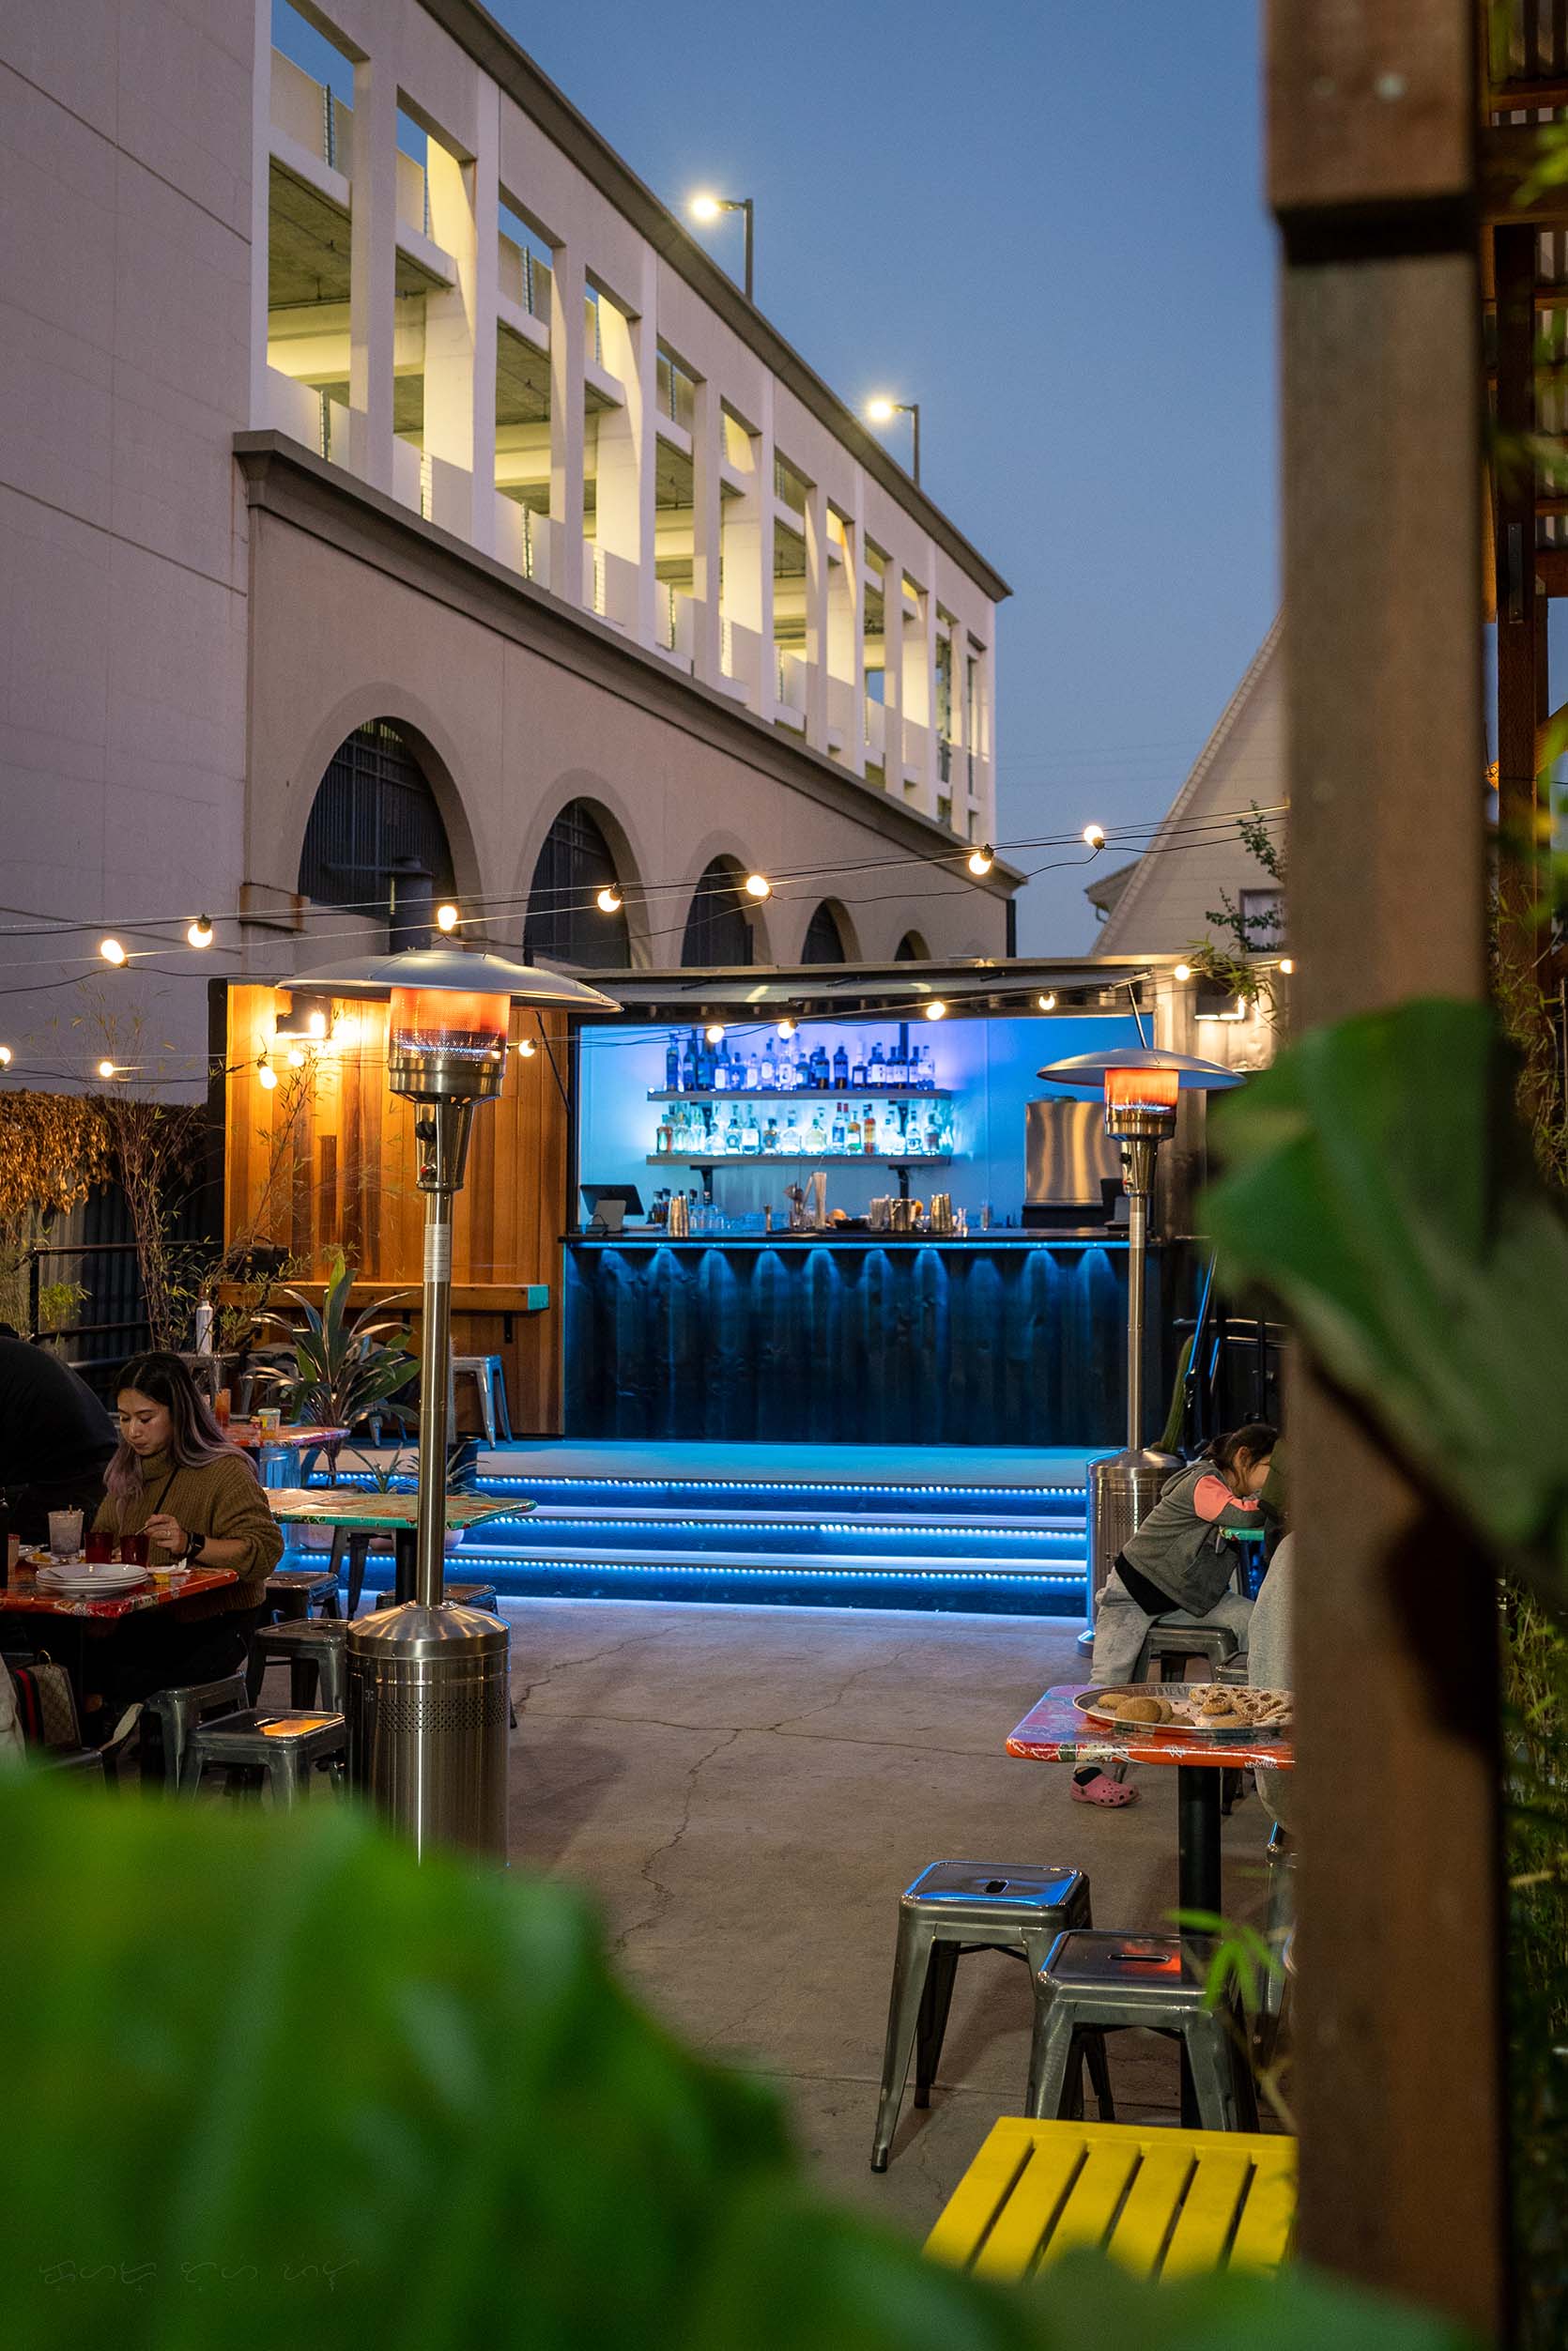 An outdoor bar lit up by blue neon lights with the Fruitvale BART station in the background.